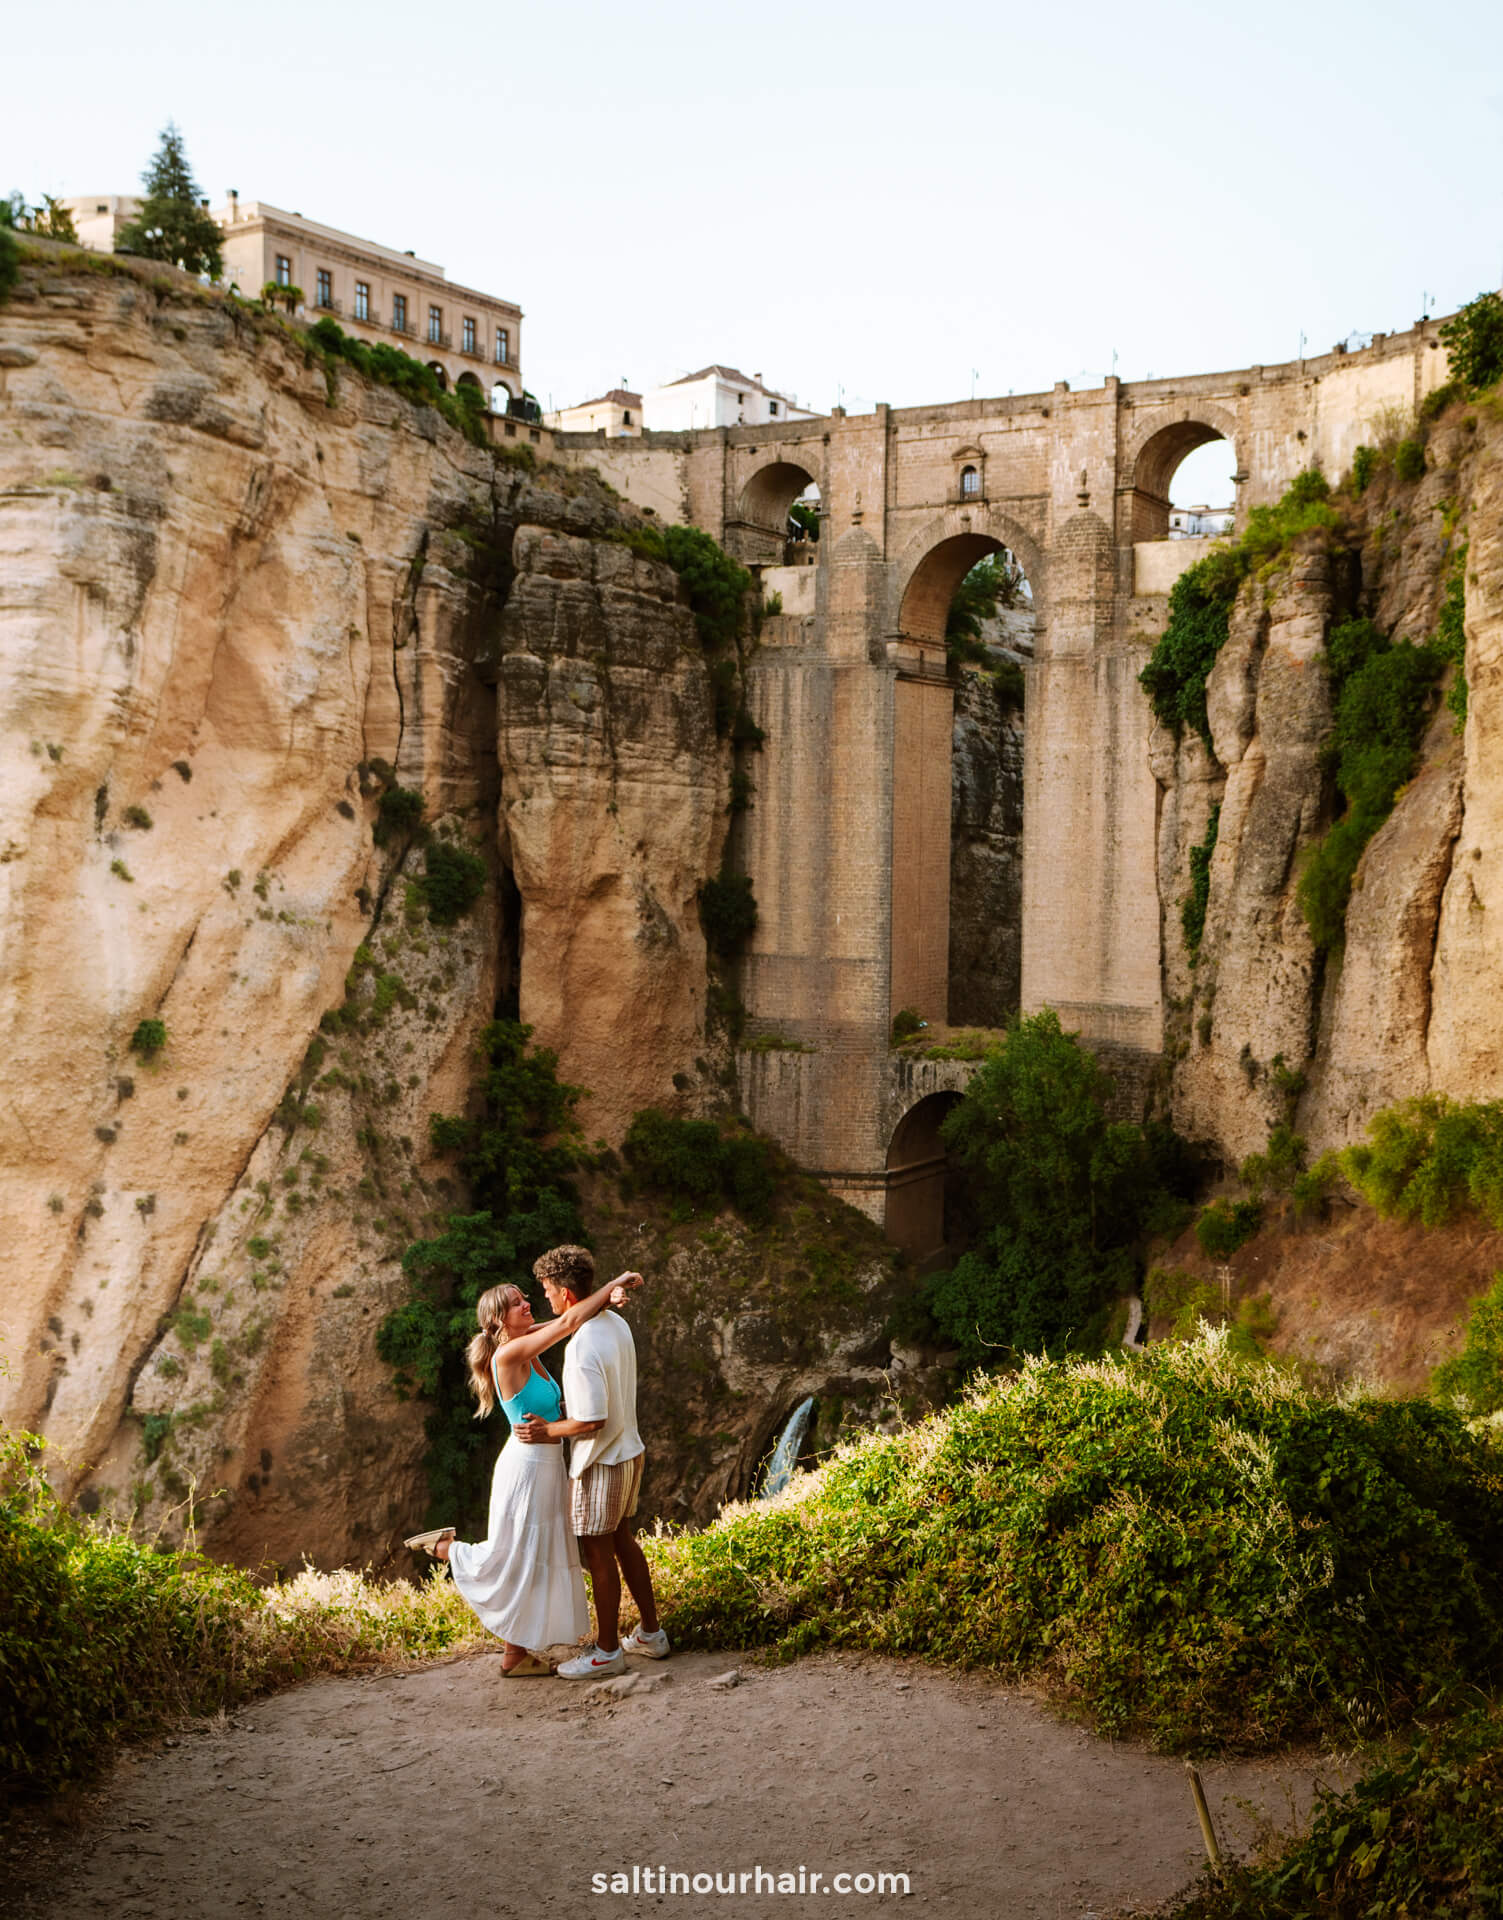 cheap places to travel ronda spain